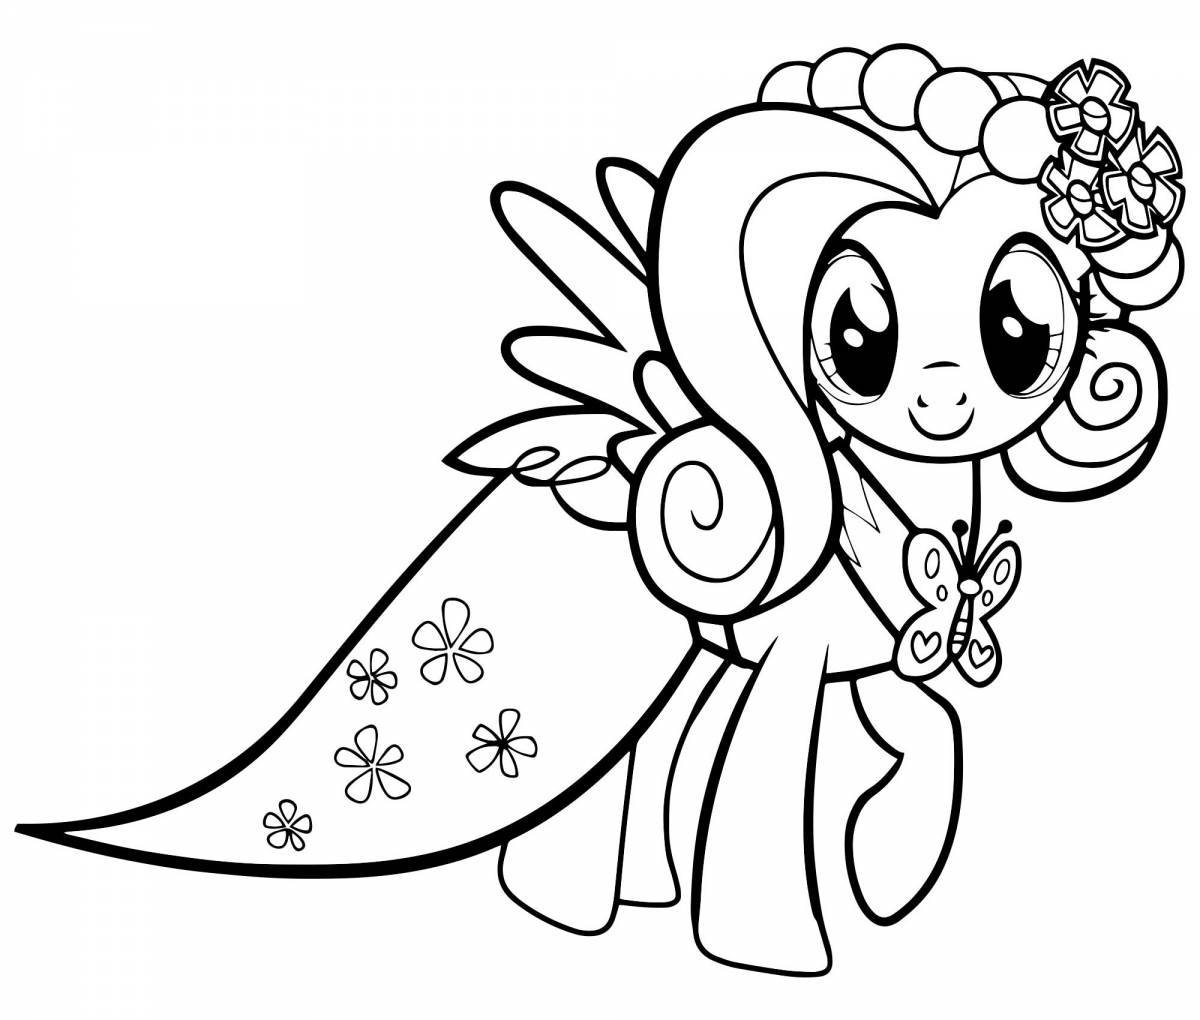 Colorful pony coloring page for kids